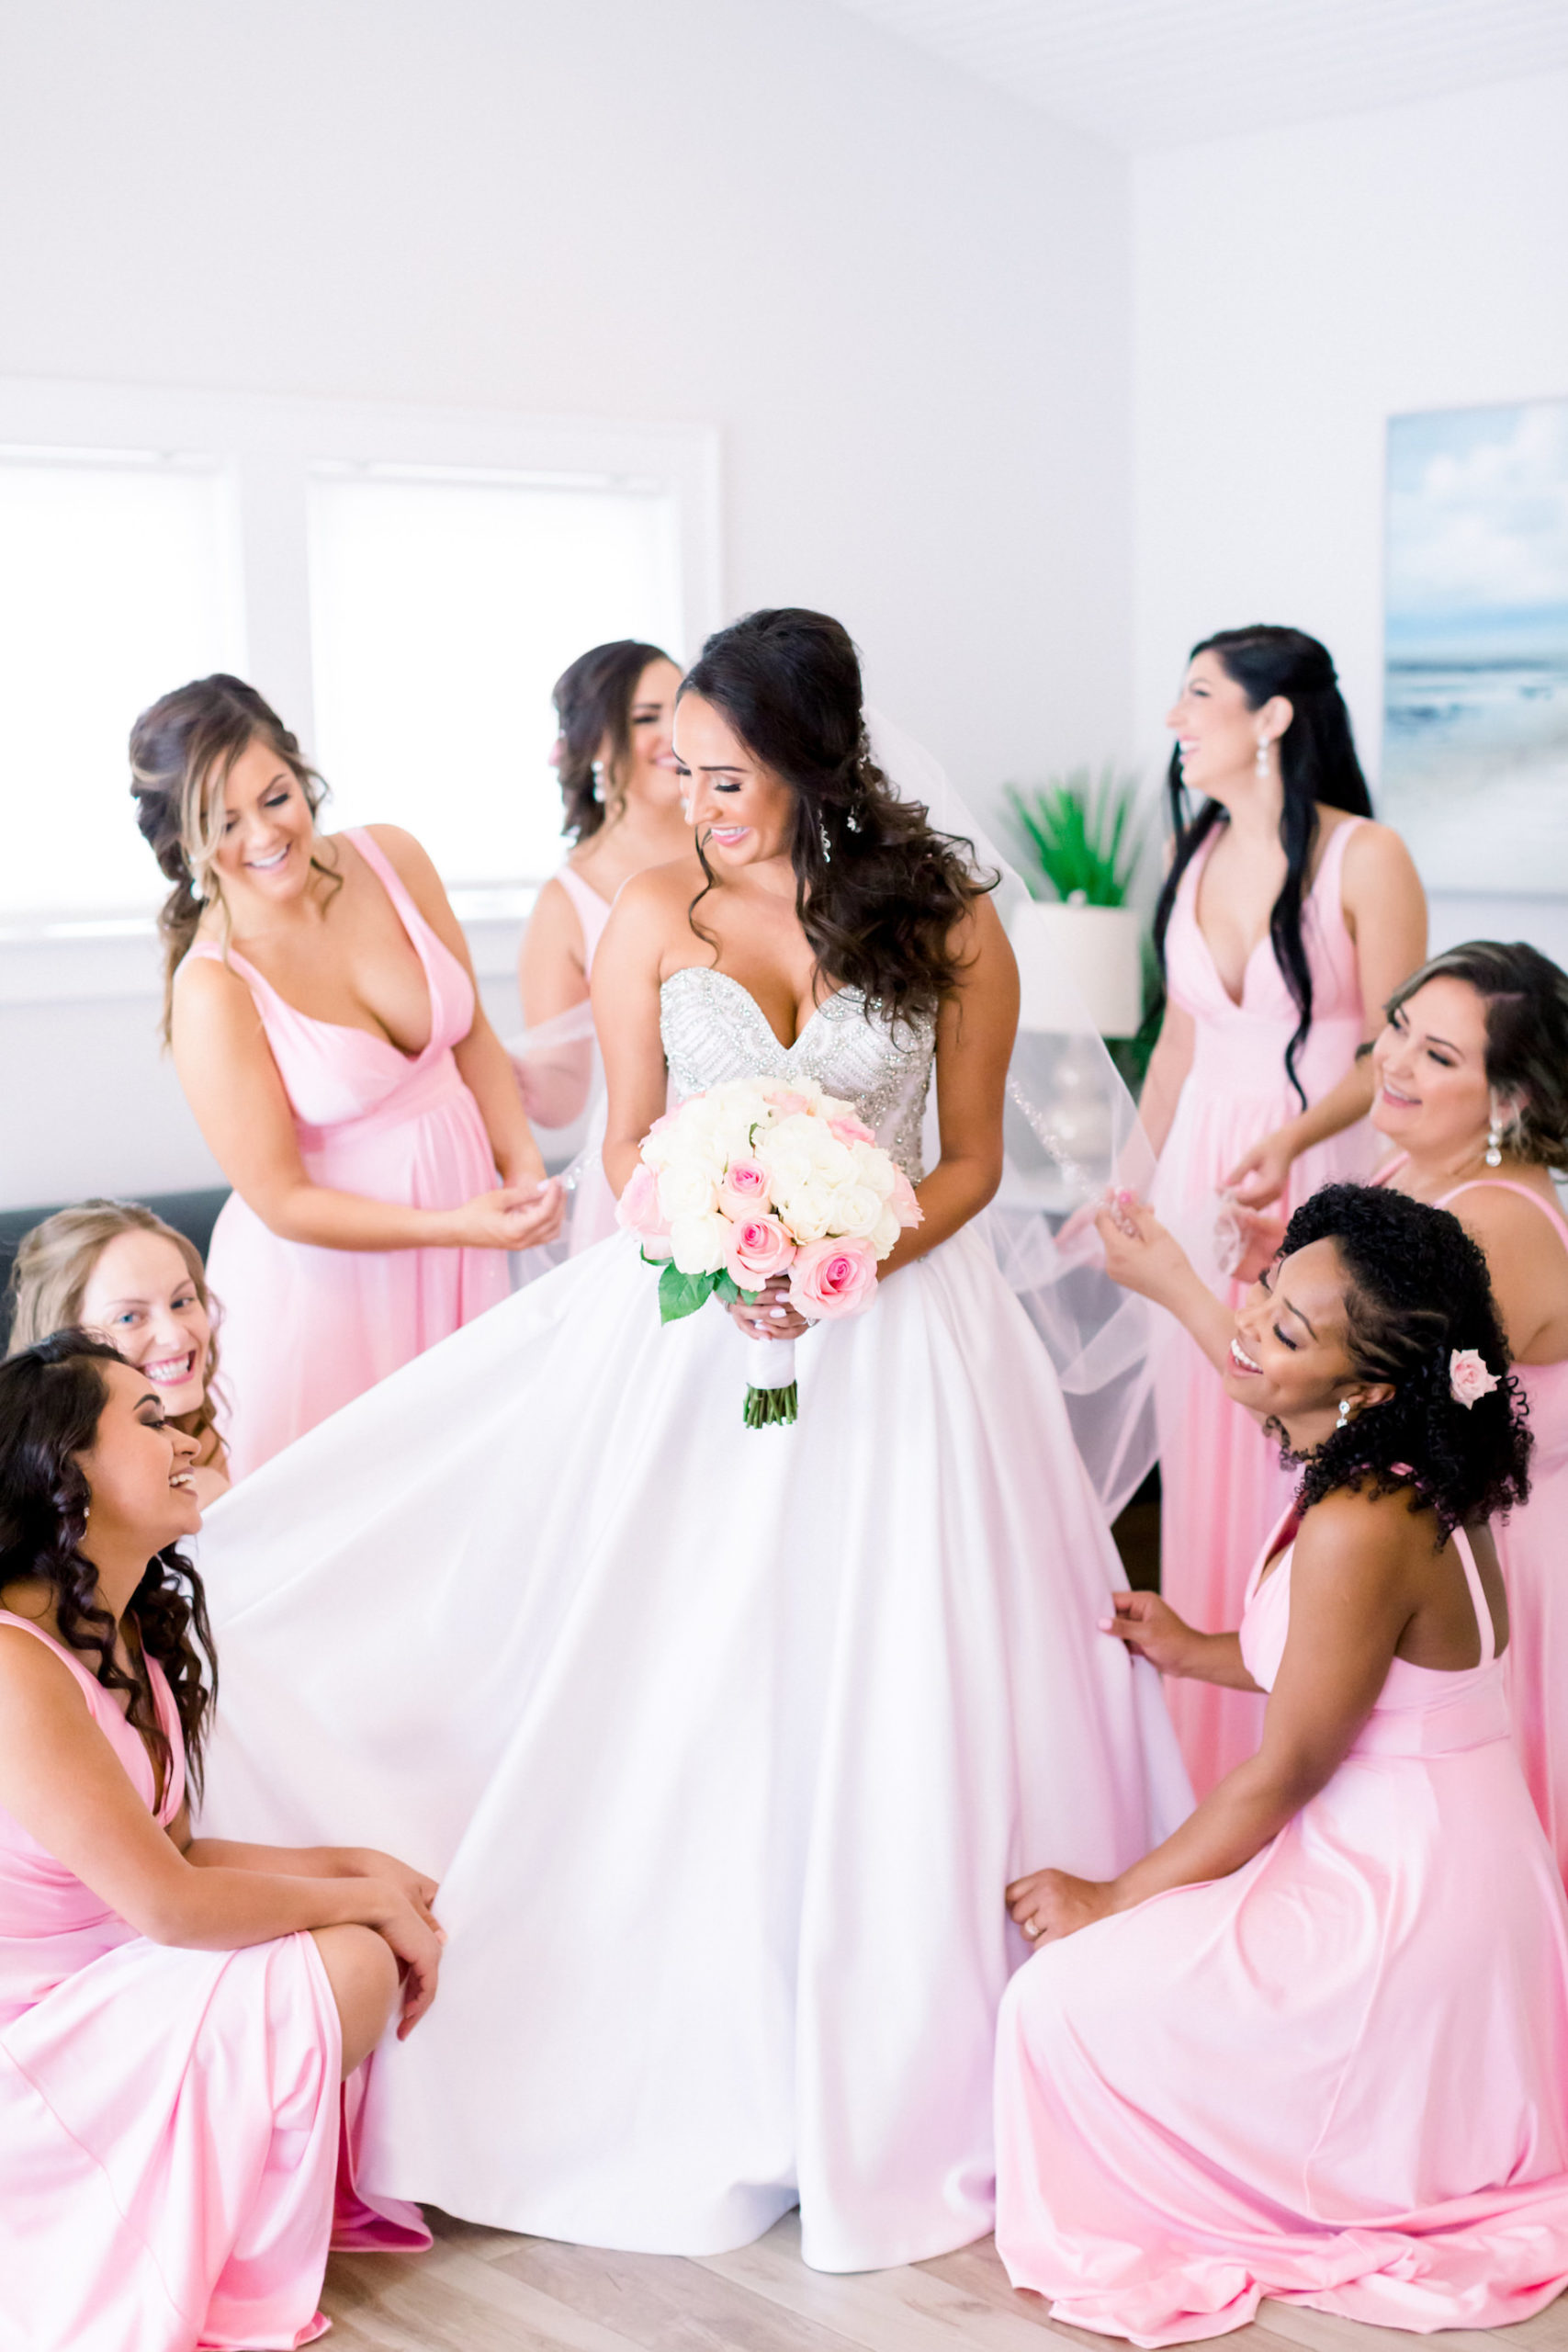 Florida Bride in Sweetheart and Strapless Rhinestone Bodice with Ballgown Skirt Wedding Dress Holding White and Pink Roses Floral Bouquet, Bridesmaids in Matching Pink Dresses Portrait | Tampa Wedding Photographer Shauna and Jordon Photography | Wedding Dress Truly Forever Bridal